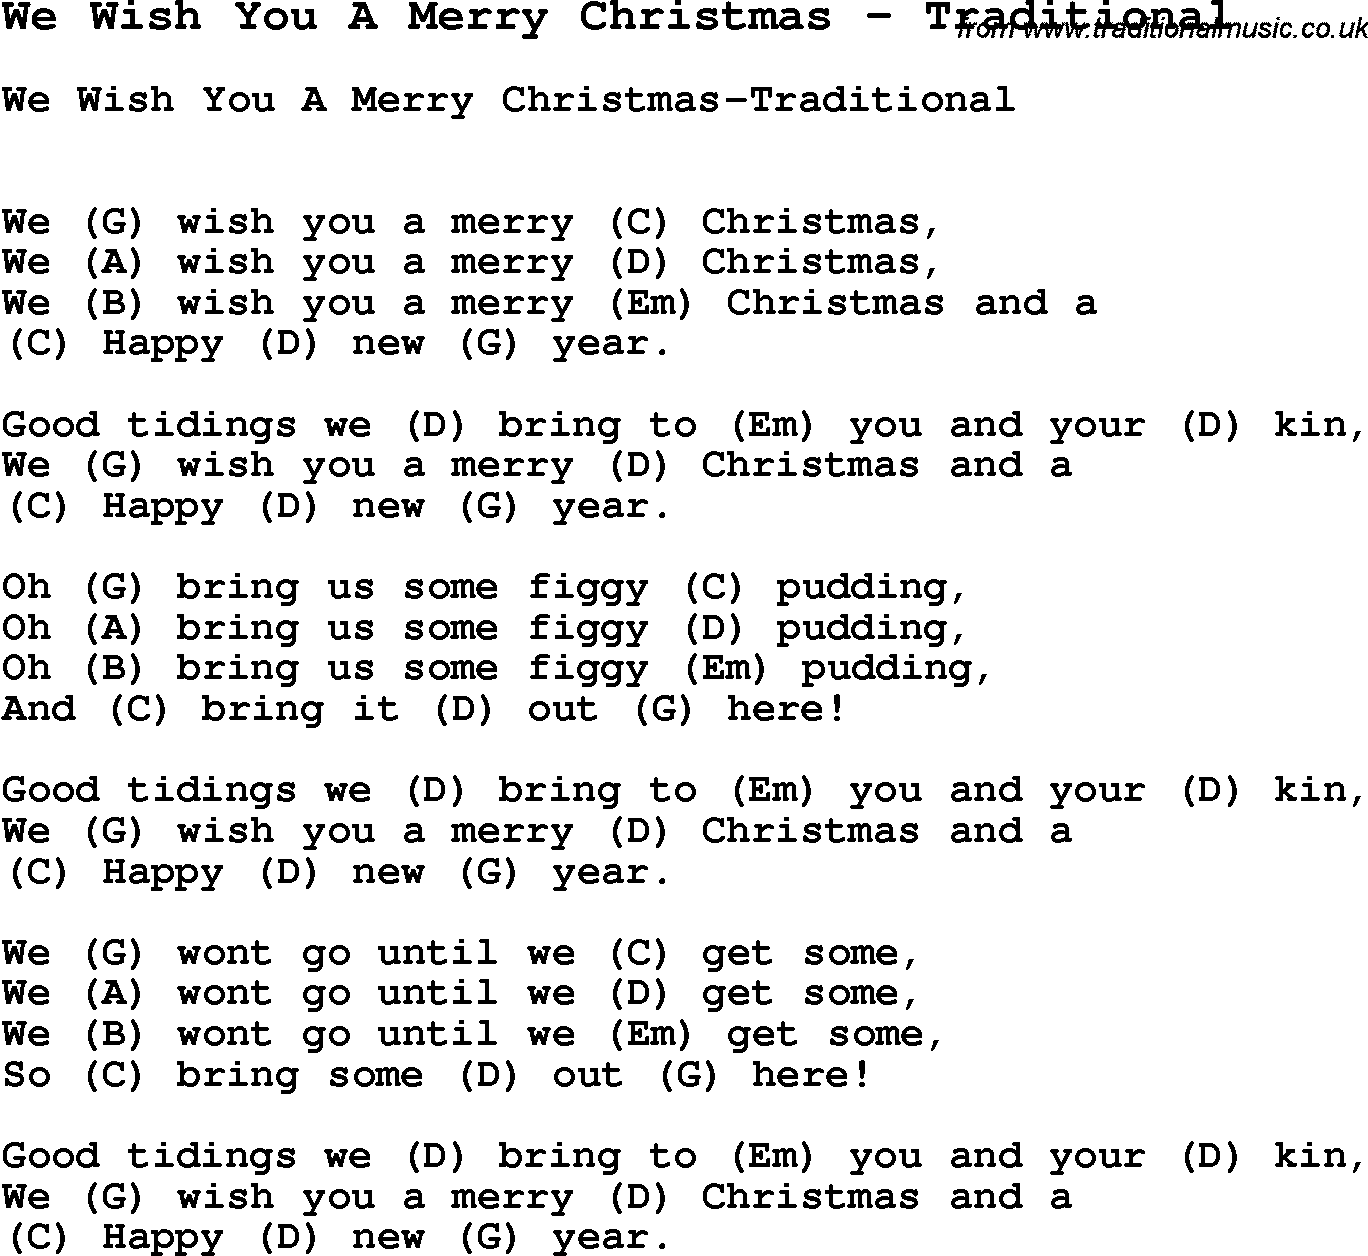 Song We Wish You A Merry Christmas by Traditional, song lyric for performance plus accompaniment for Ukulele, Guitar, etc.